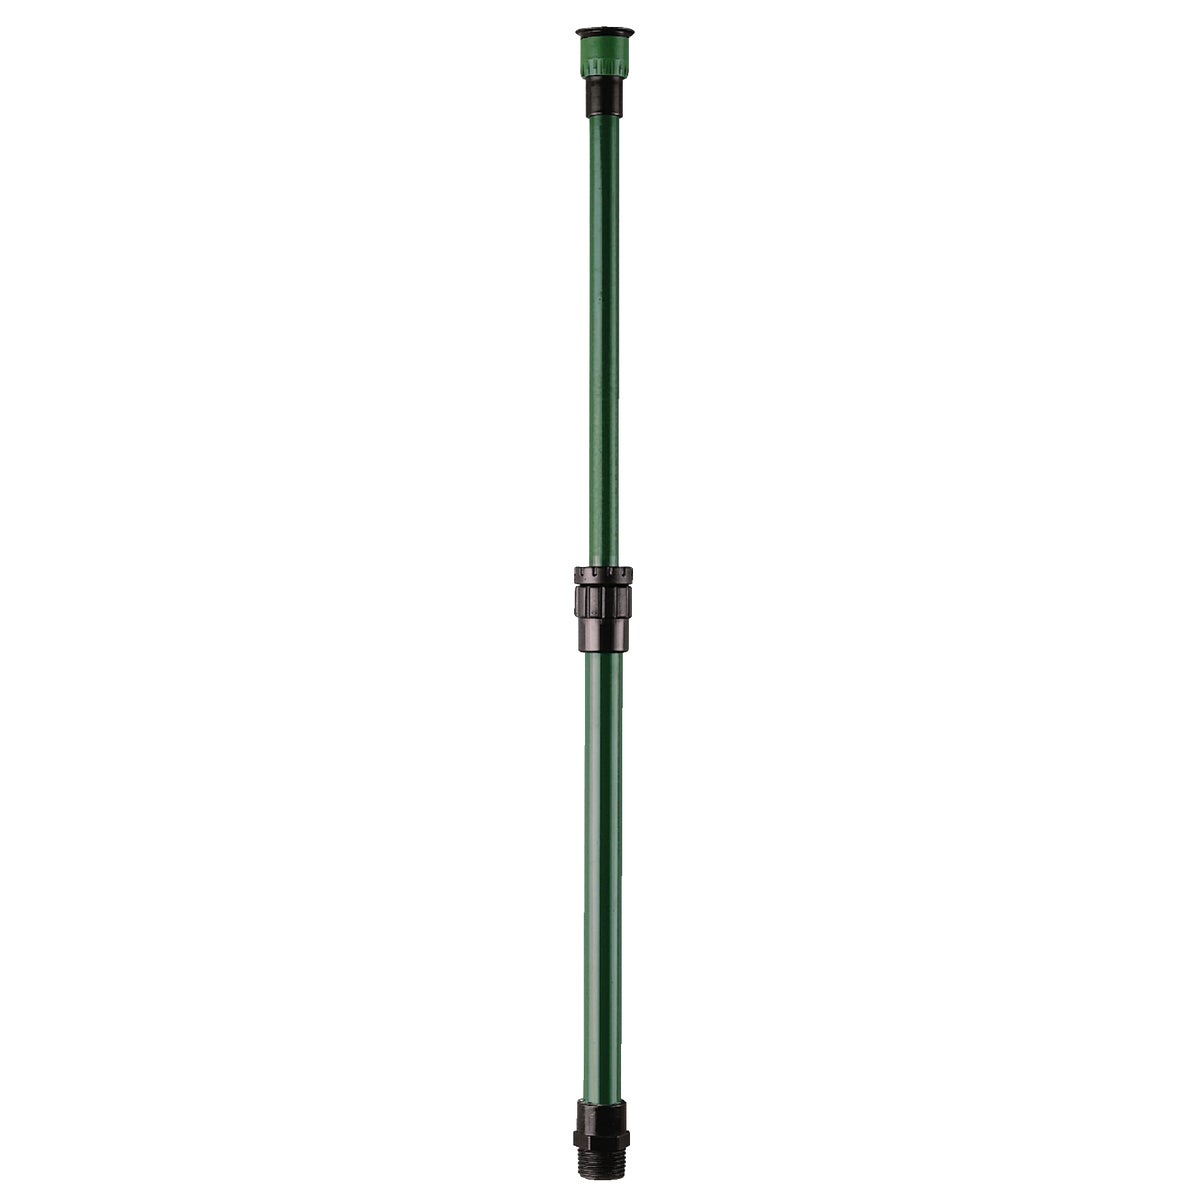 Item 729260, Adjustable riser extends from 16 inches to 30 inches. No tools required.